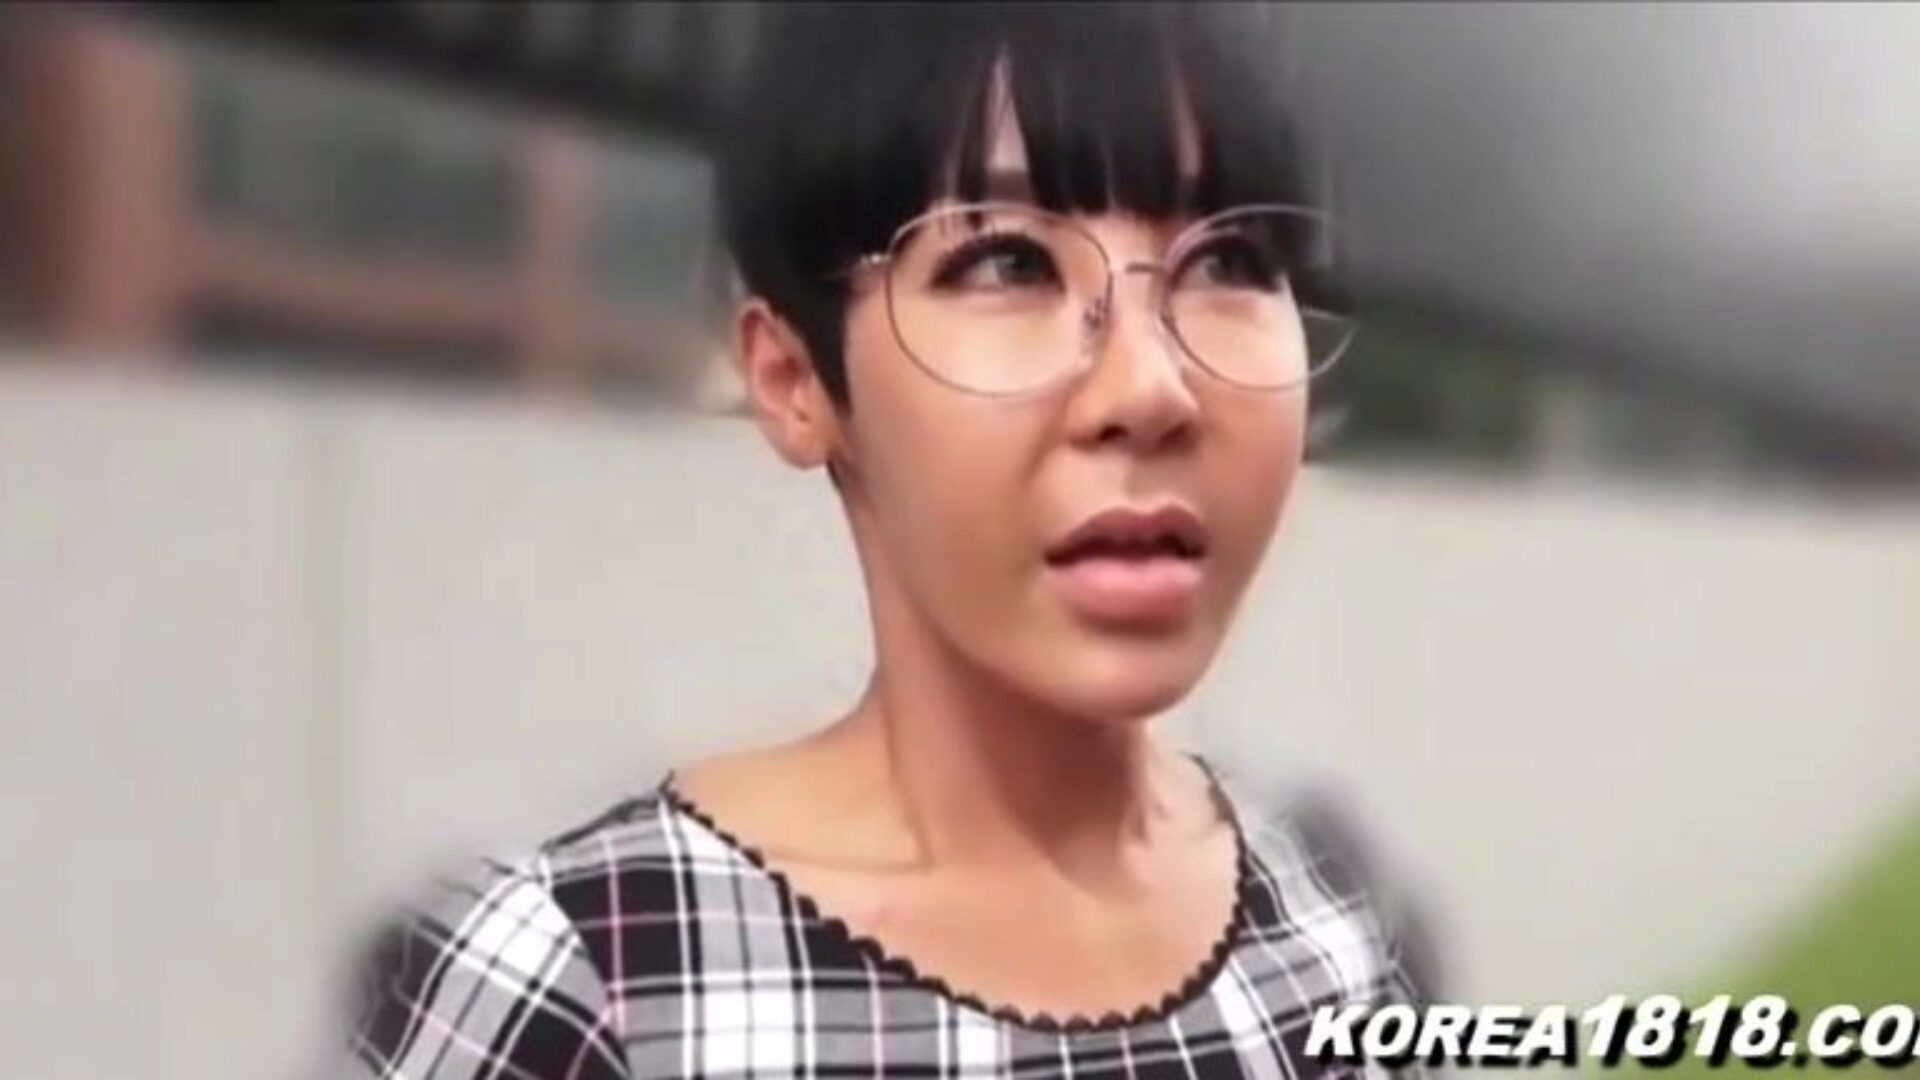 Unattractive Korean mother I'd like to fuck with Glasses in Japan, Porn 29: xHamster See Unattractive Korean mummy I'd like to plumb with Glasses in Japan episode on xHamster, the hottest HD orgy tube web resource with tons of free-for-all Oriental Japanese & Free mother I'd like to screw Tube porn clips